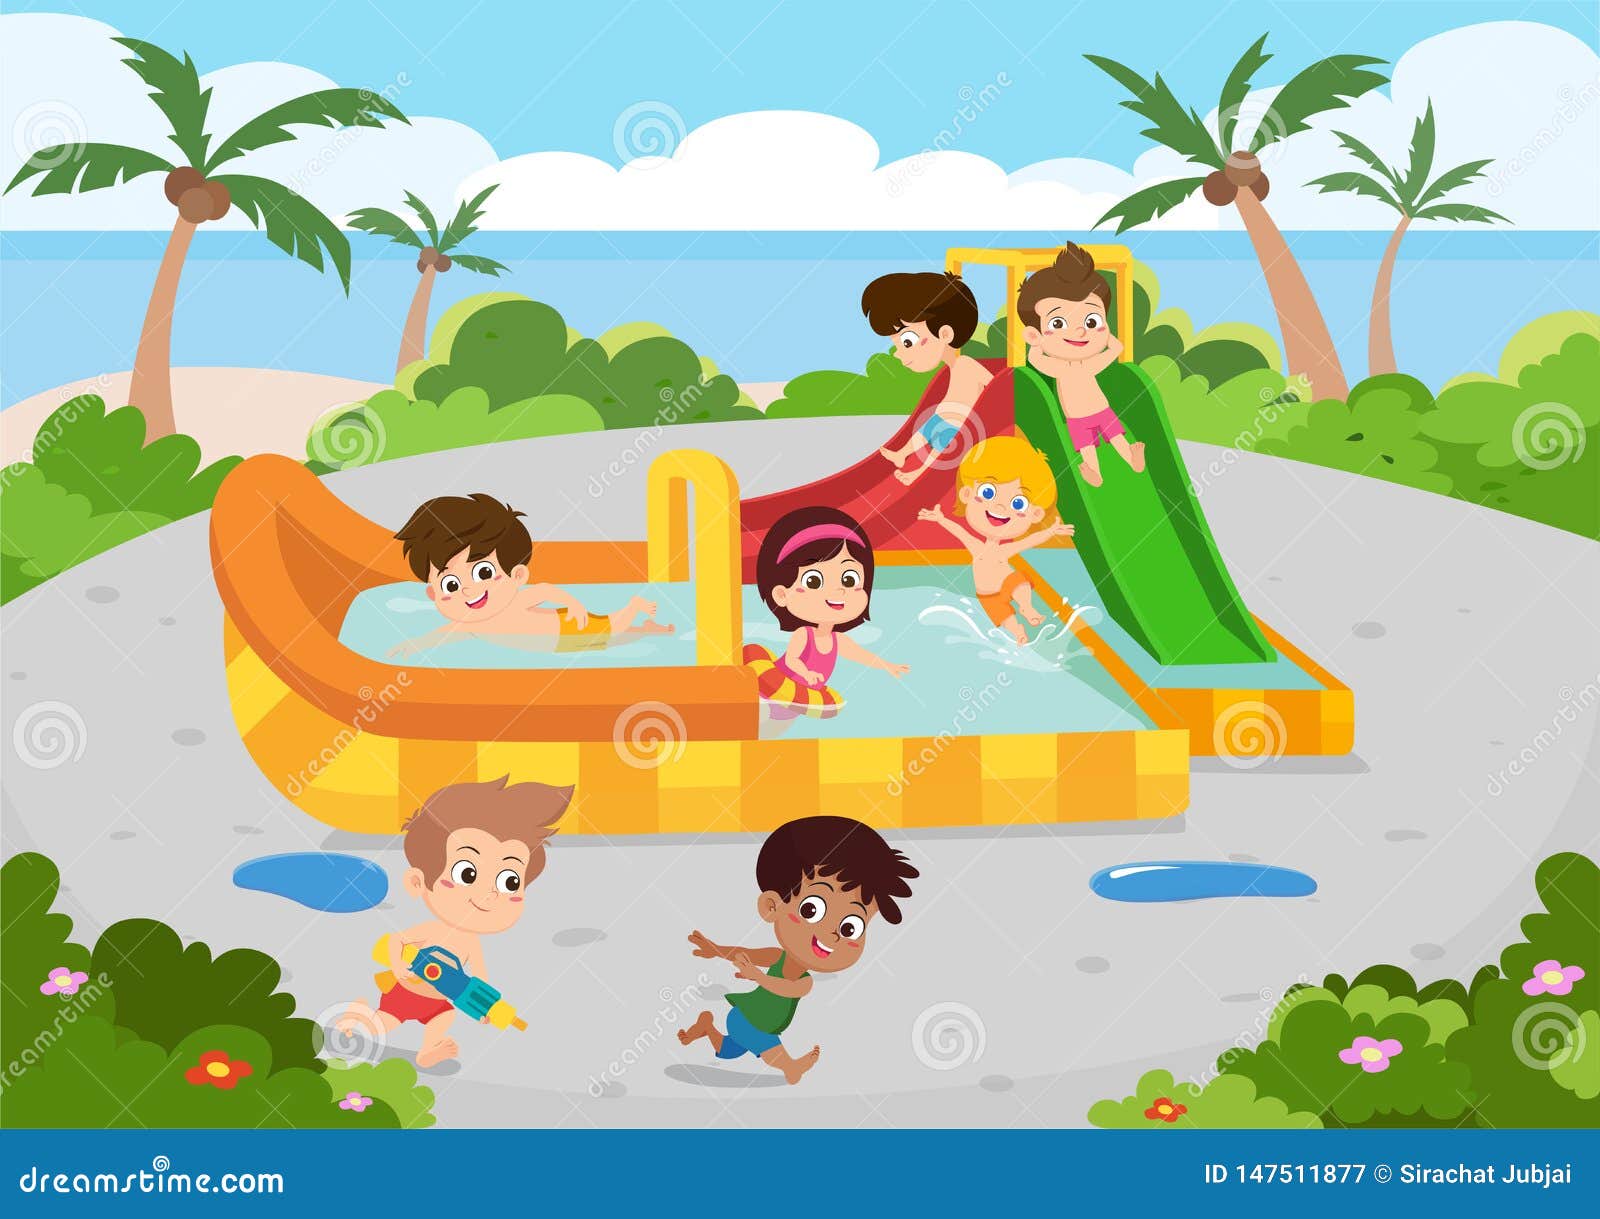 Download In The Morning,The Best Summer Child`s Outdoor Activities ...